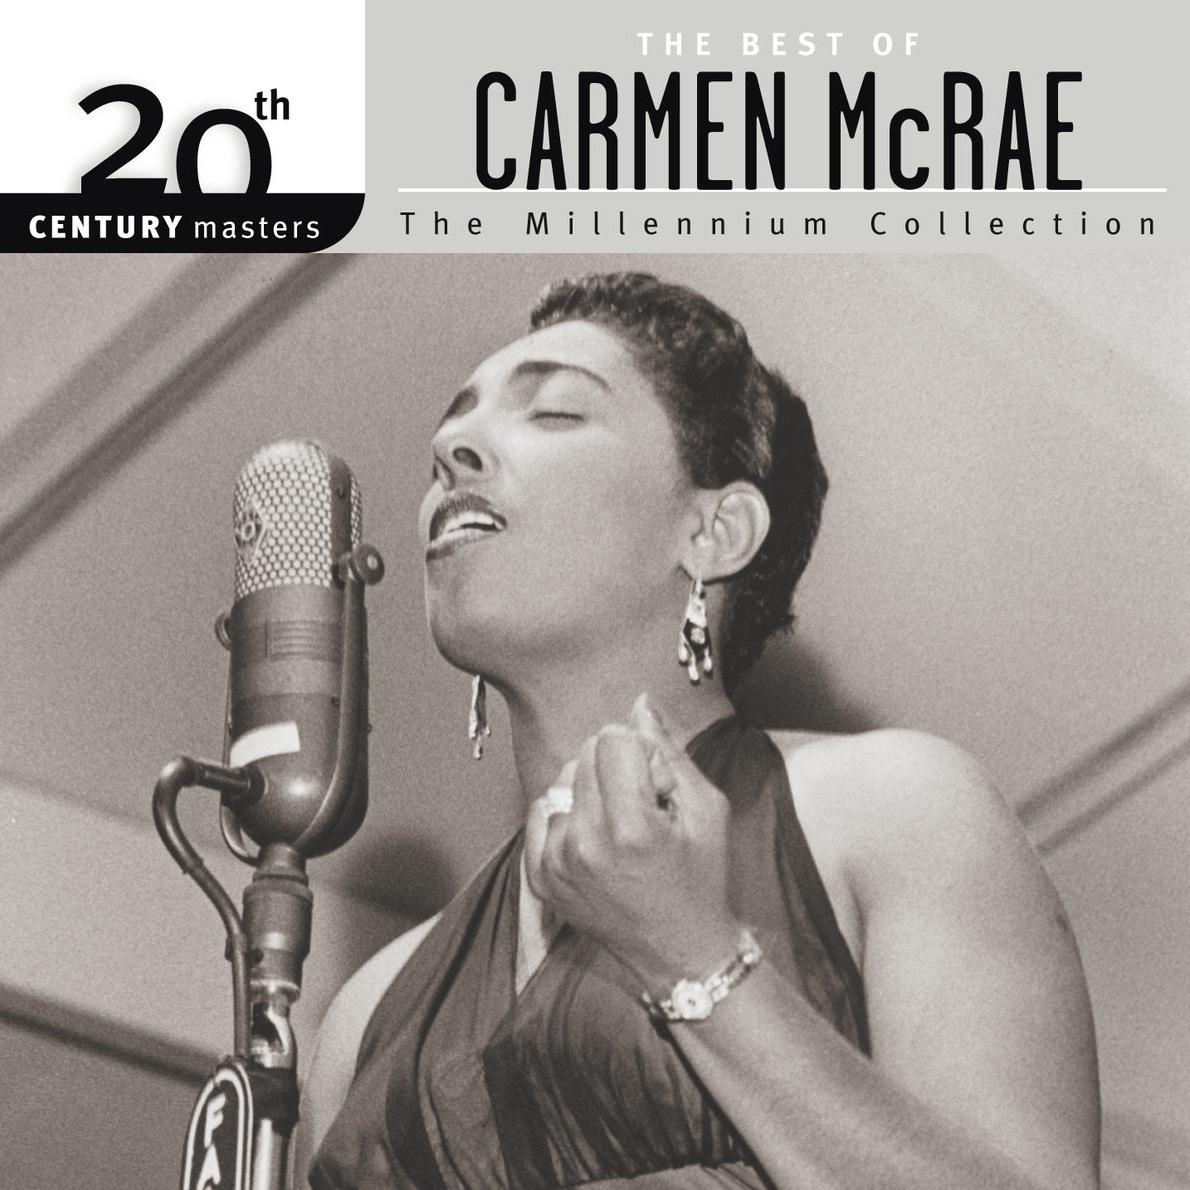 20th Century Masters - The Millennium Collection: The Best of Carmen McRae